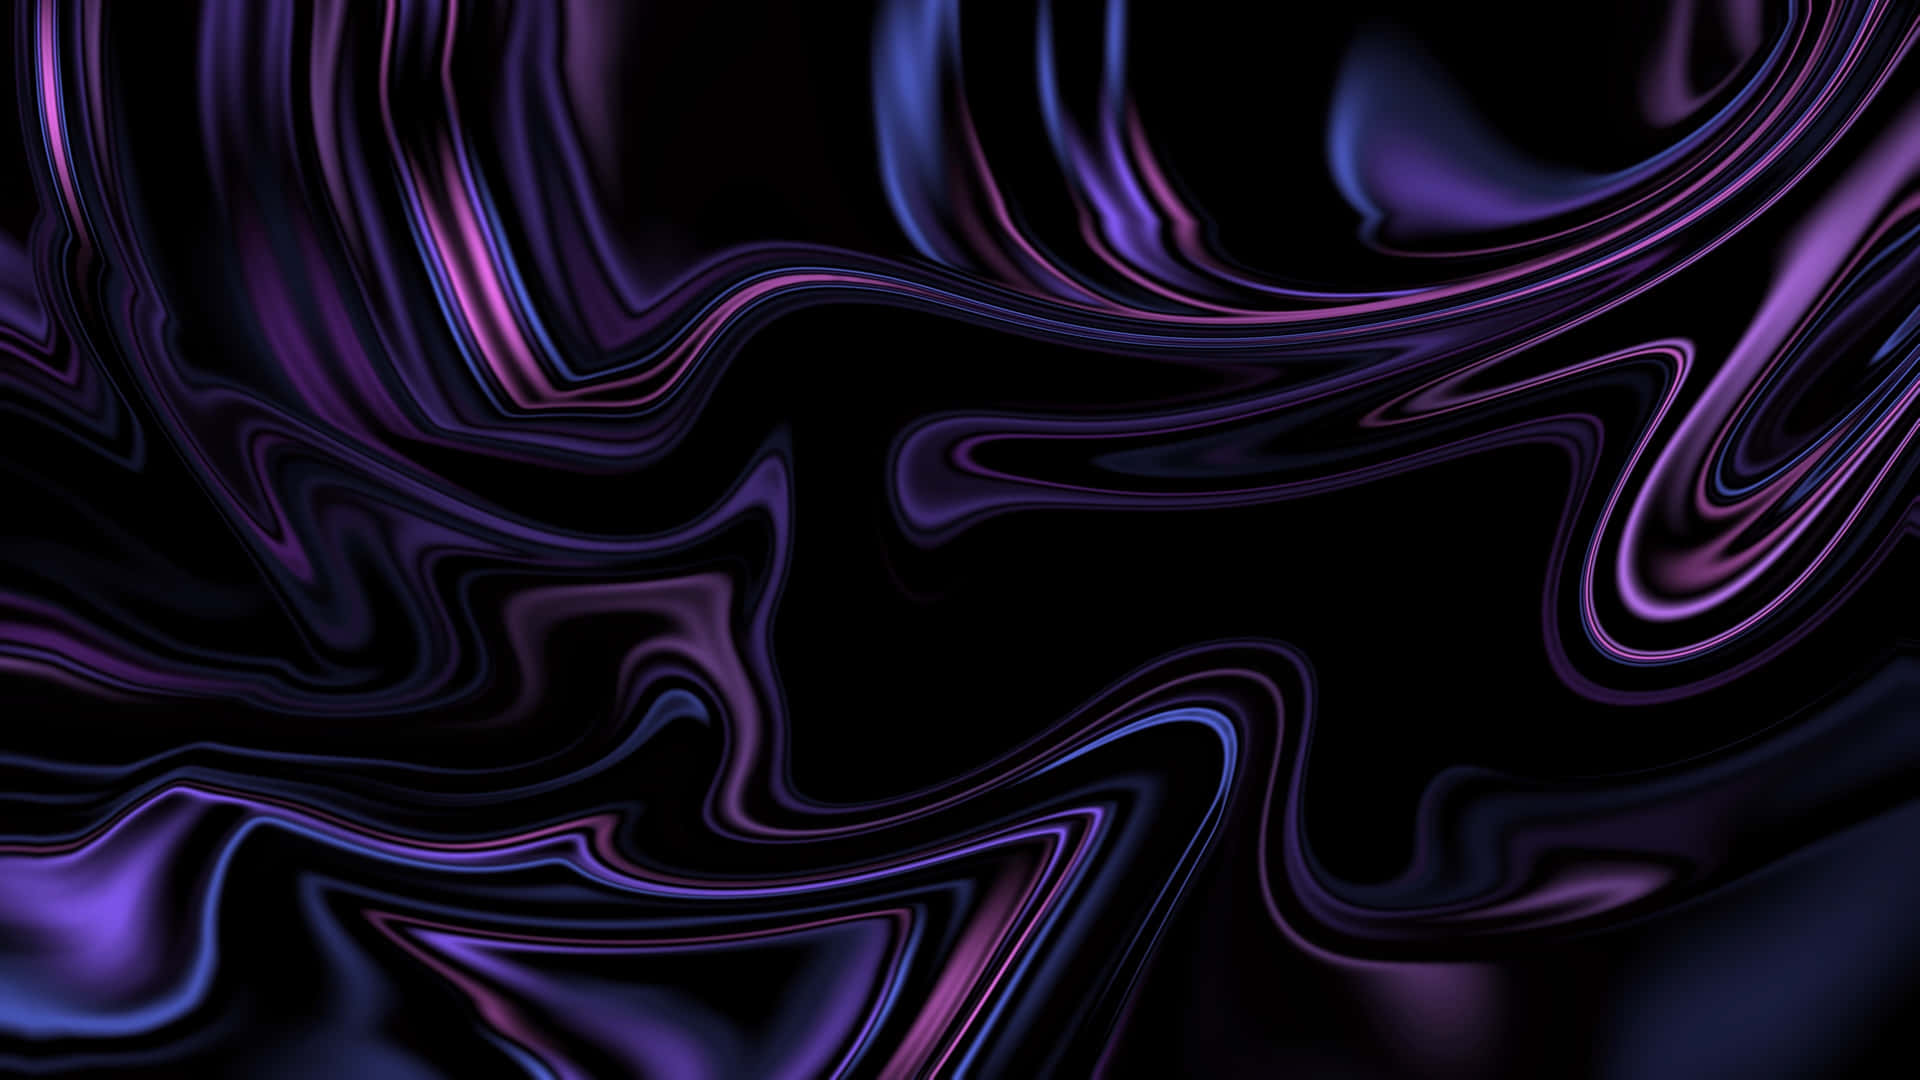 Blue And Purple Wavy Lines Wallpaper